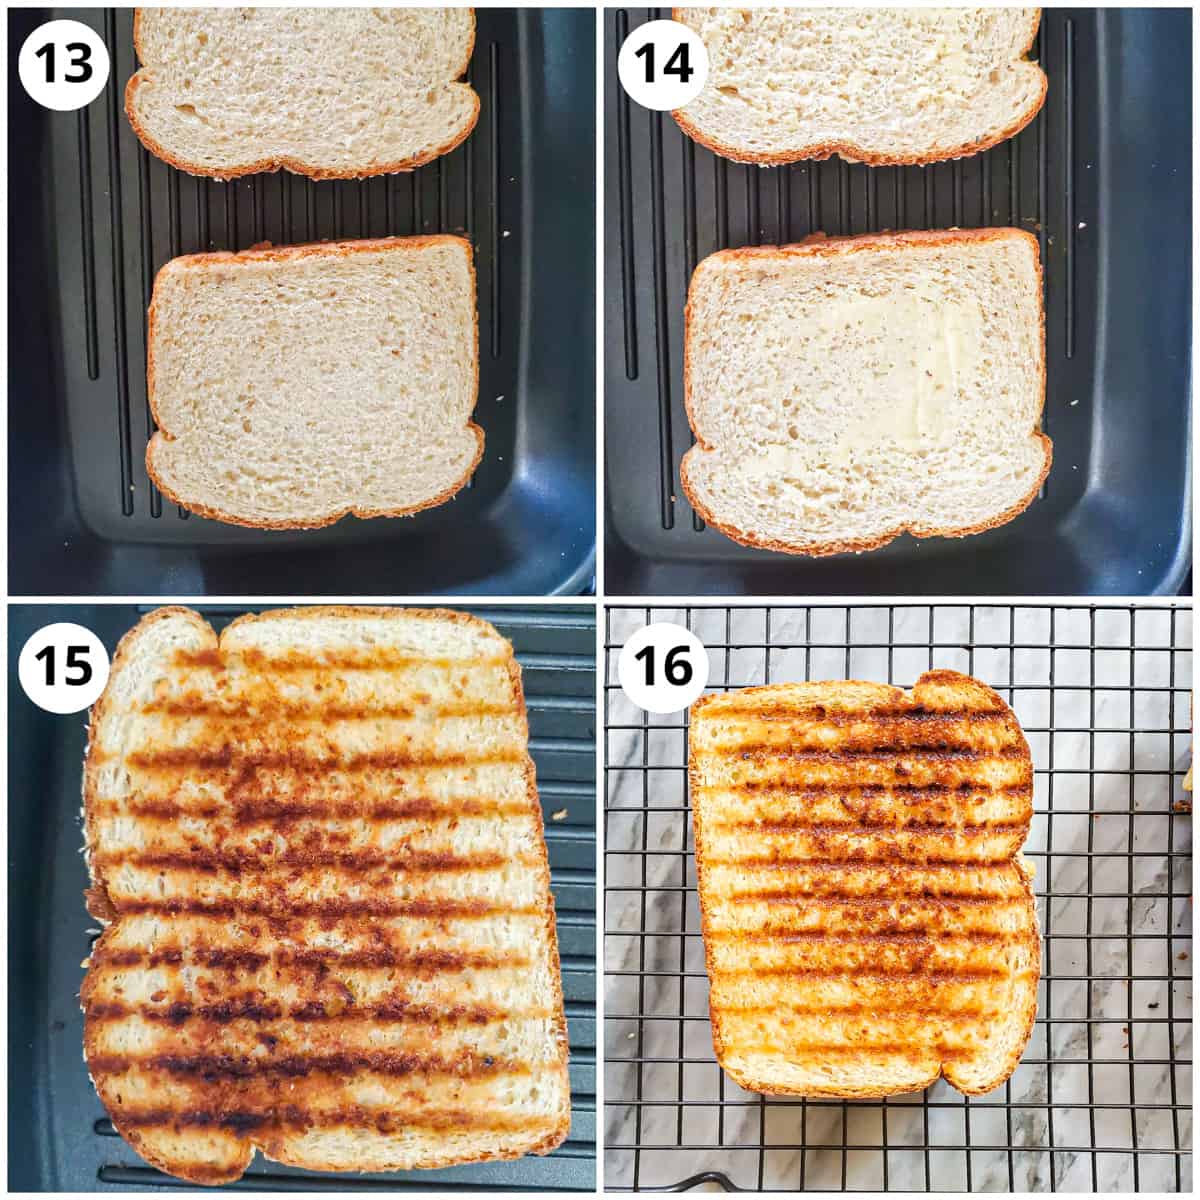 Grilling the creamy vegetable sandwich until crispy and golden brown. 